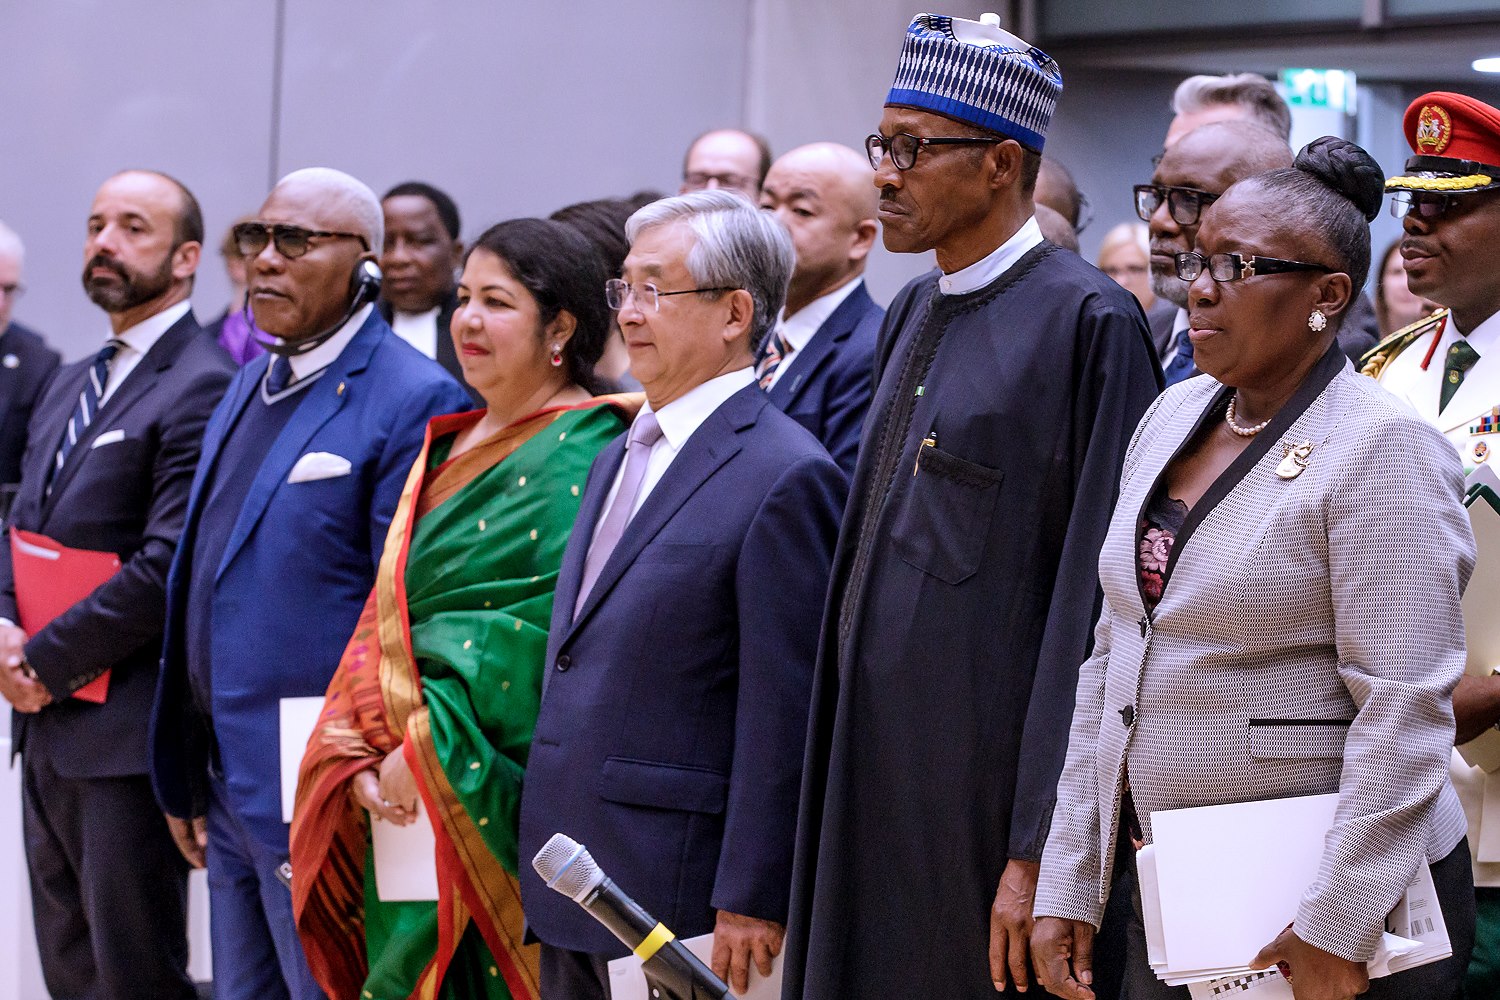 President Buhari in a group photo with official of the Criminal Court ahead of his Keynote address at the 20th Anniversary of the International Criminal Court (ICC) at the Hague, Netherlands on 17th July 2018